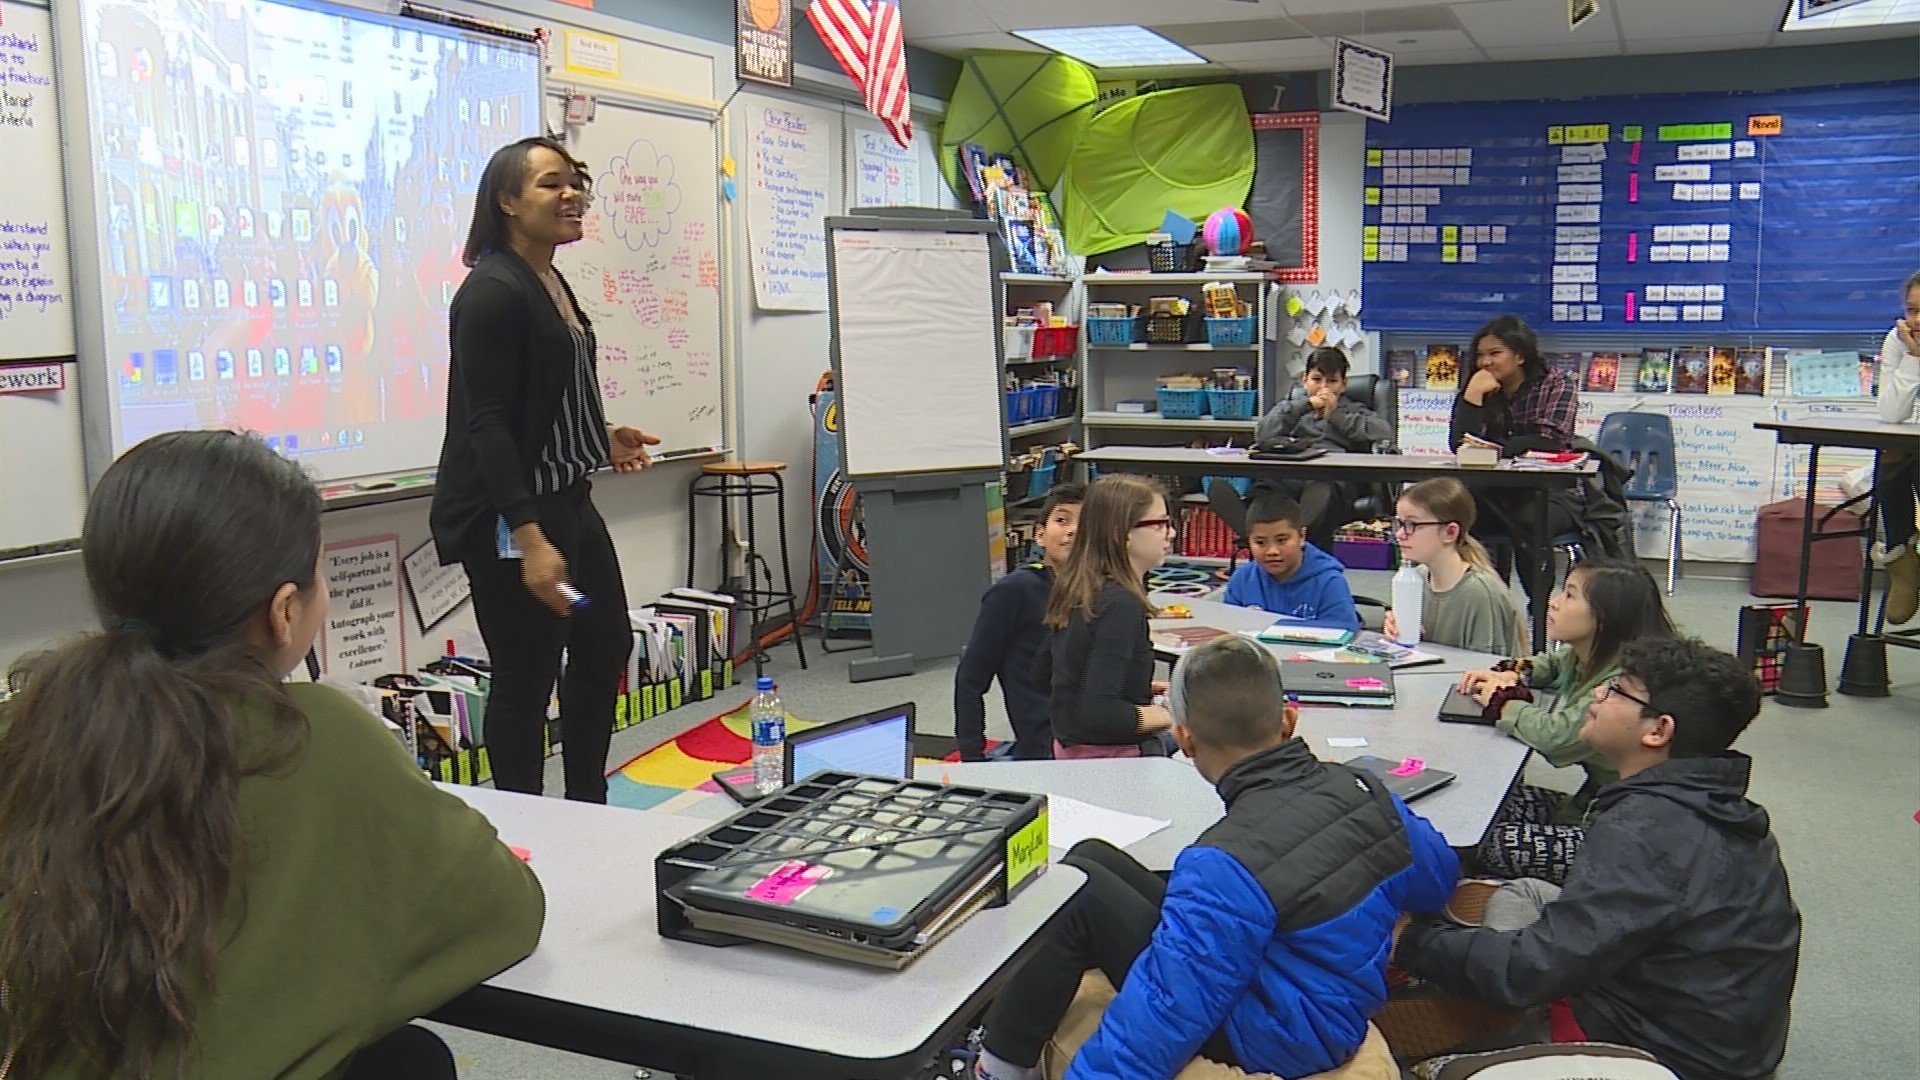 As a kid, Denisha Saucedo didn't have a positive experience in school- but now, she's using her own story to help her students thrive. Sponsored by WGU Washington.